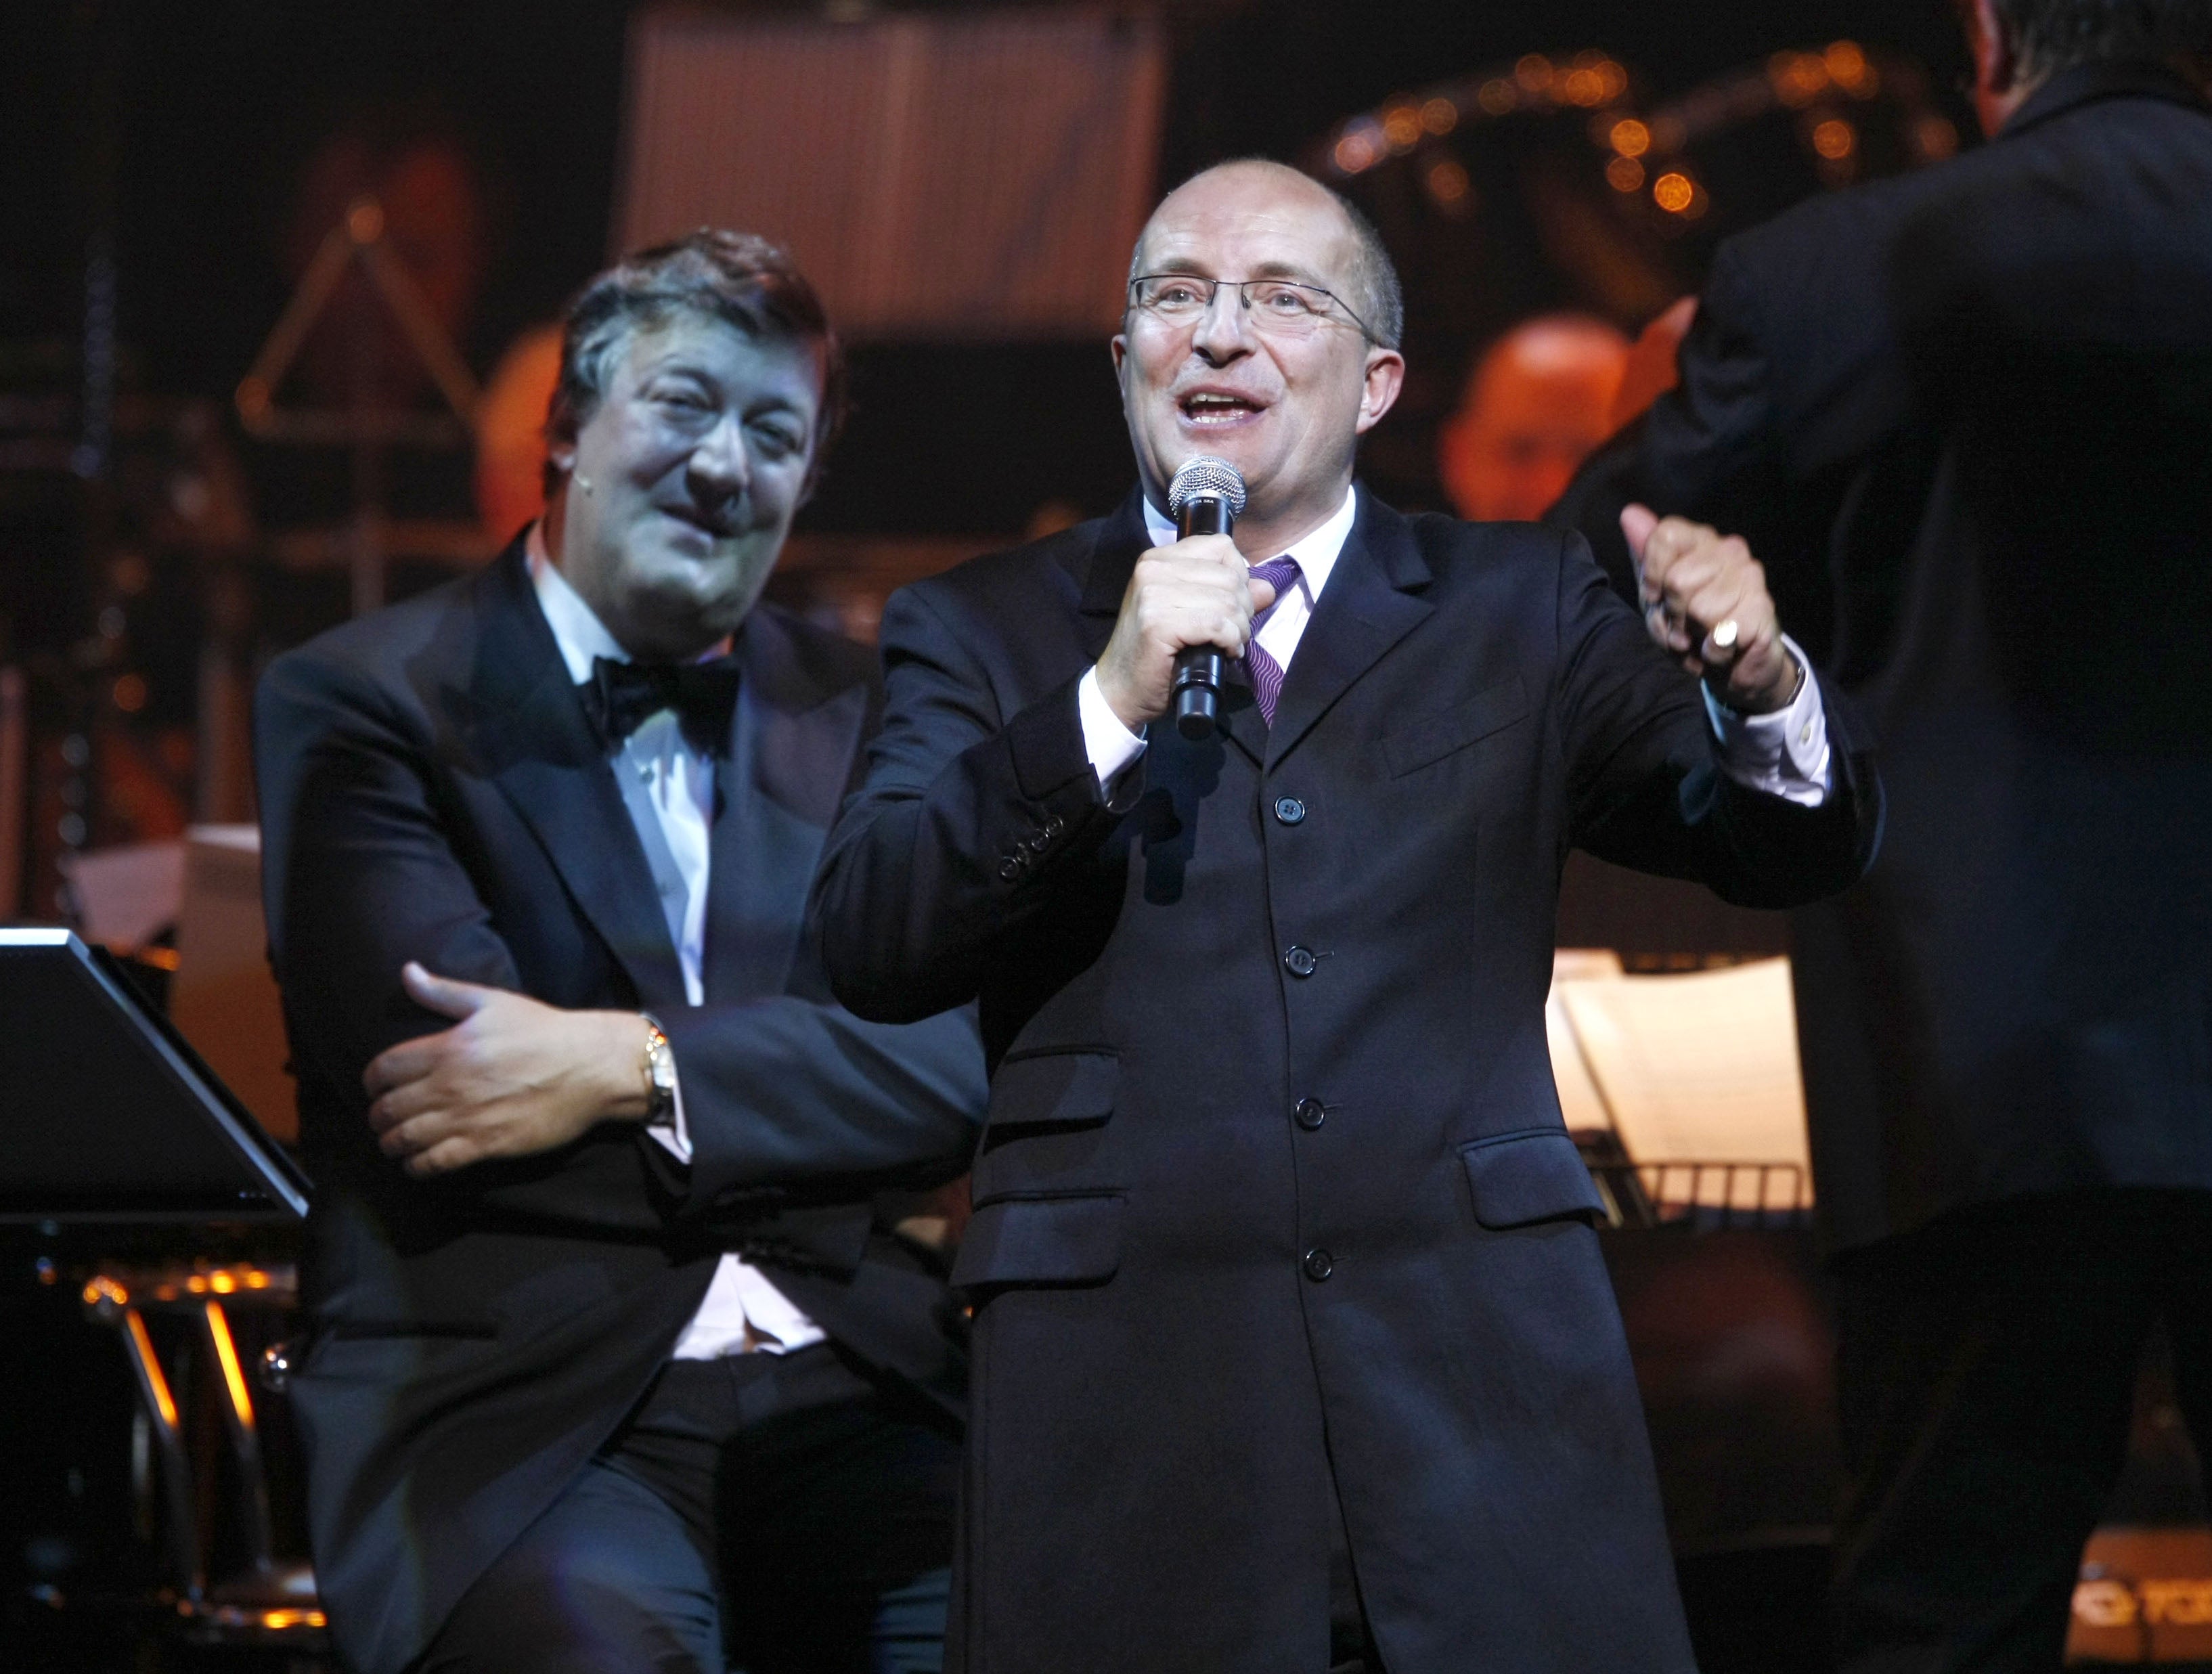 Kit Hesketh-Harvey with Stephen Fry at the London Palladium in 2008